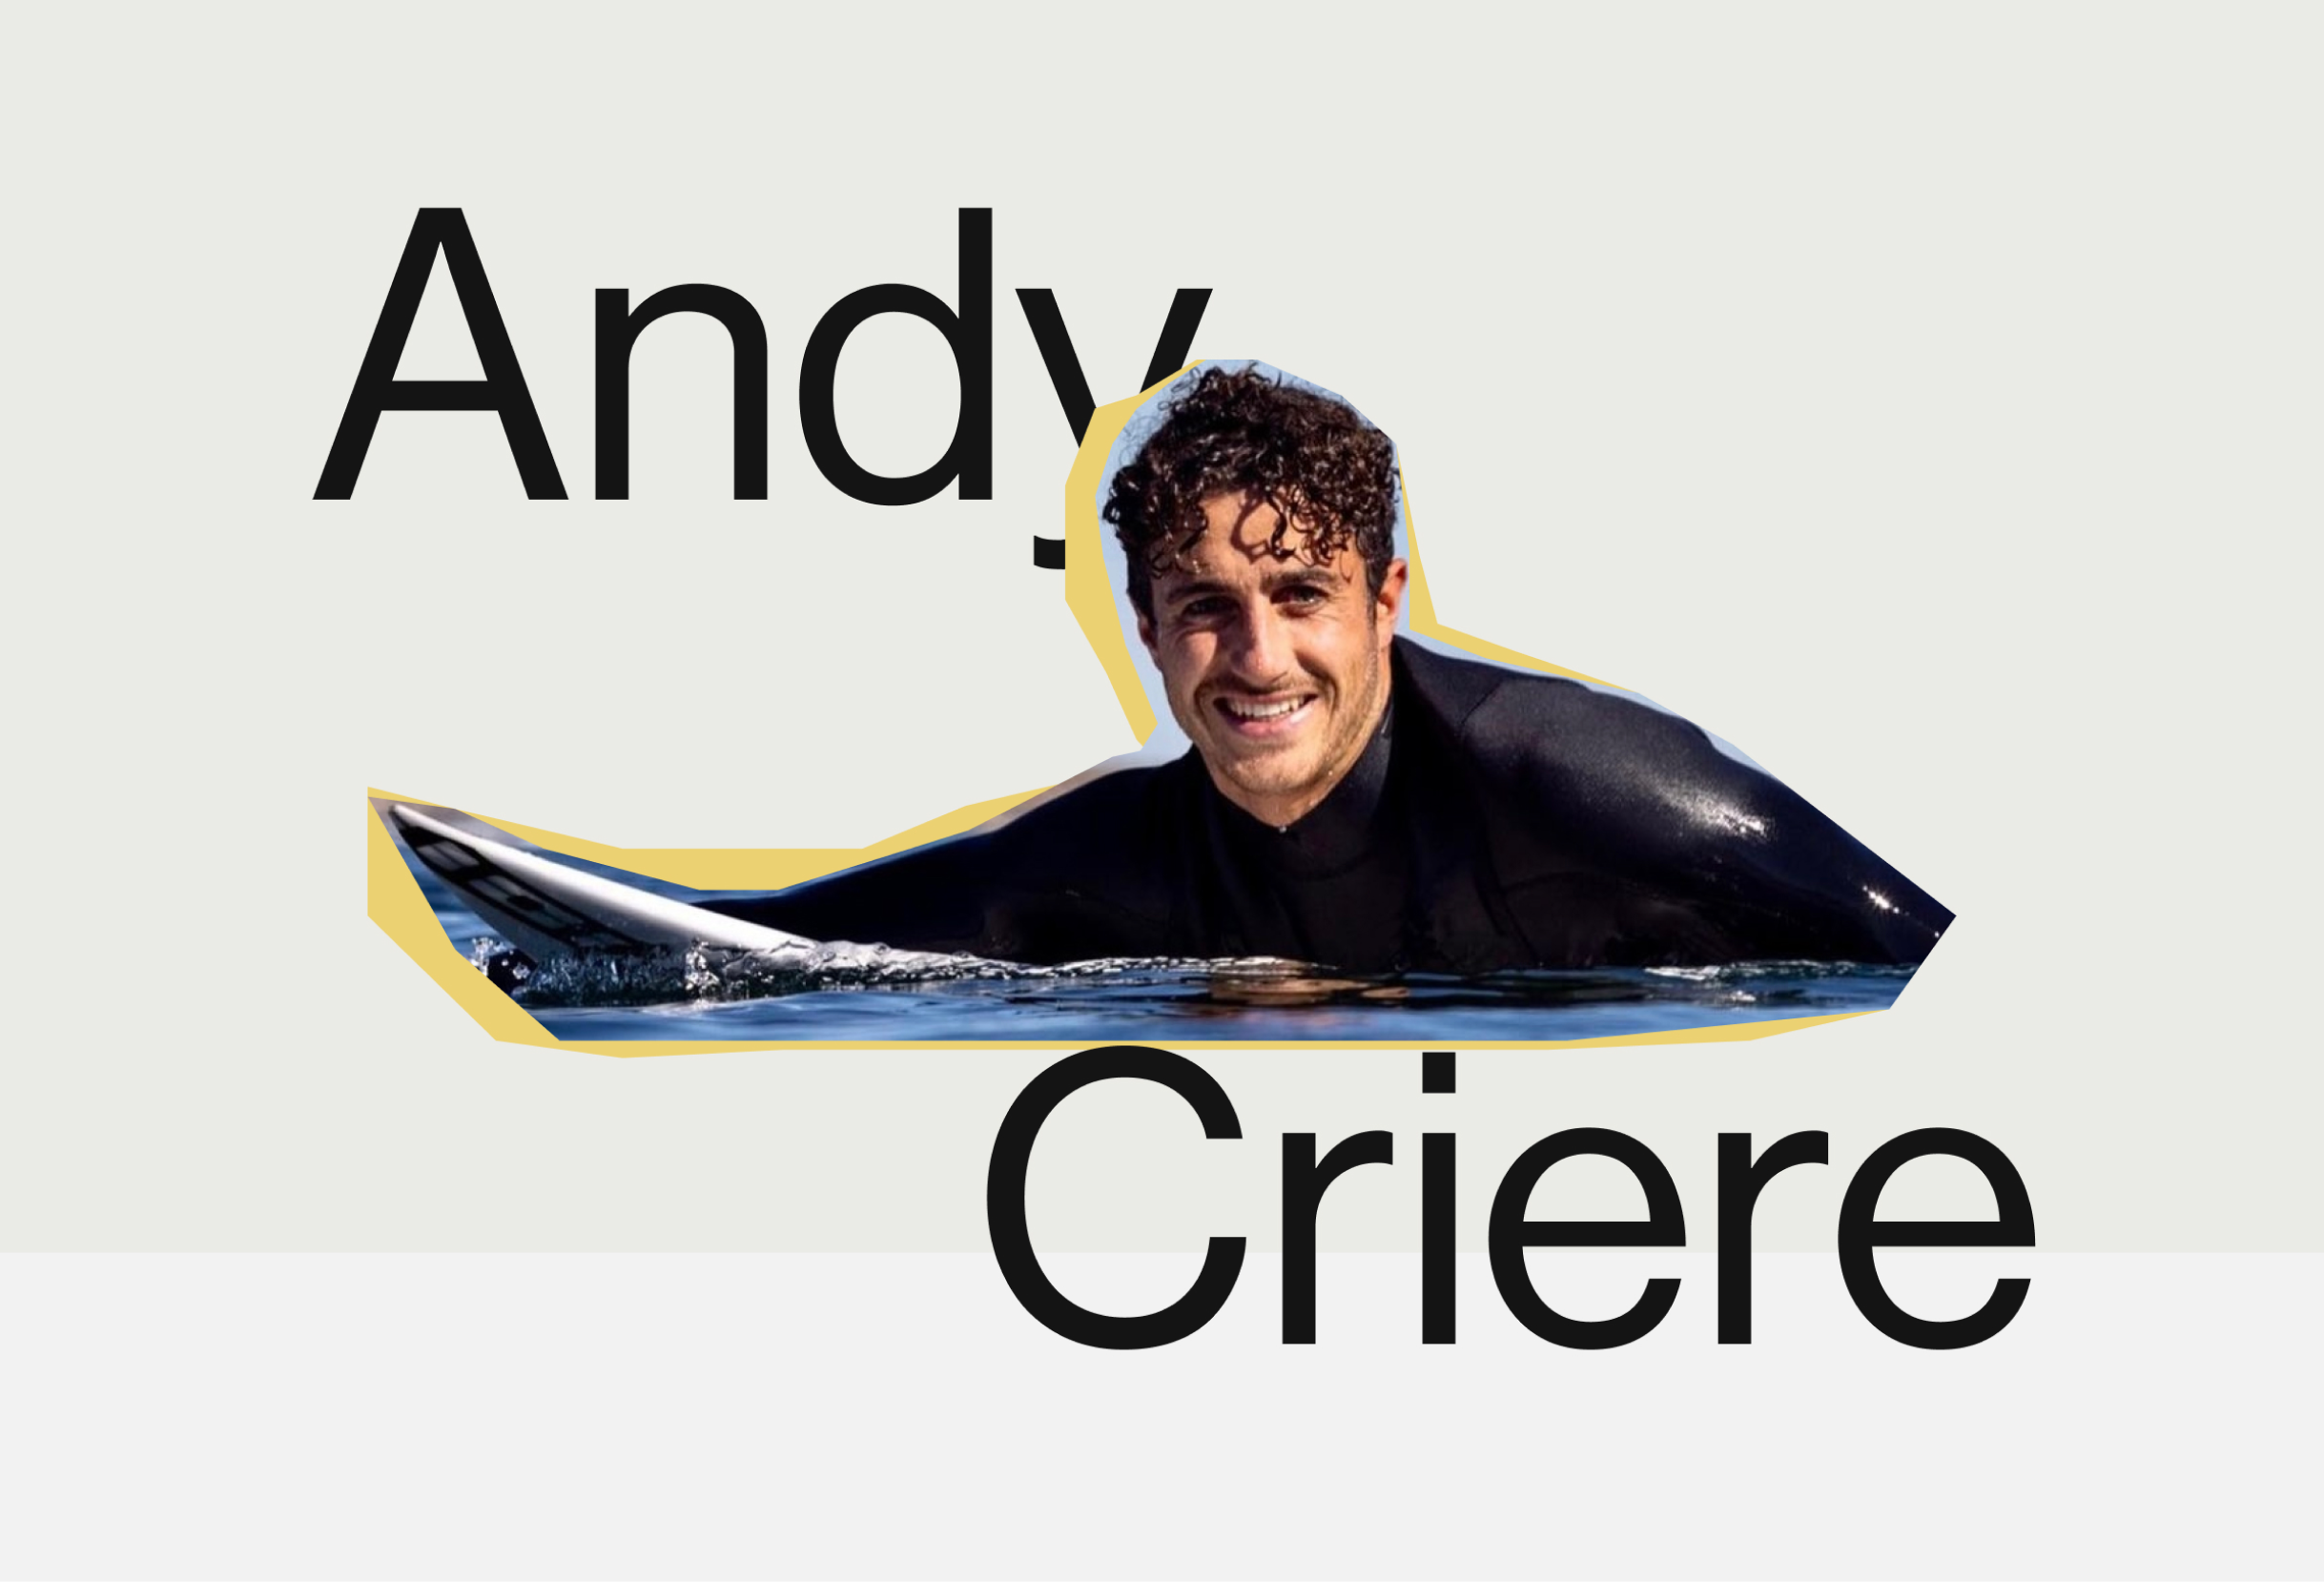 ANDY CRIERE / PROFESSIONAL SURFER